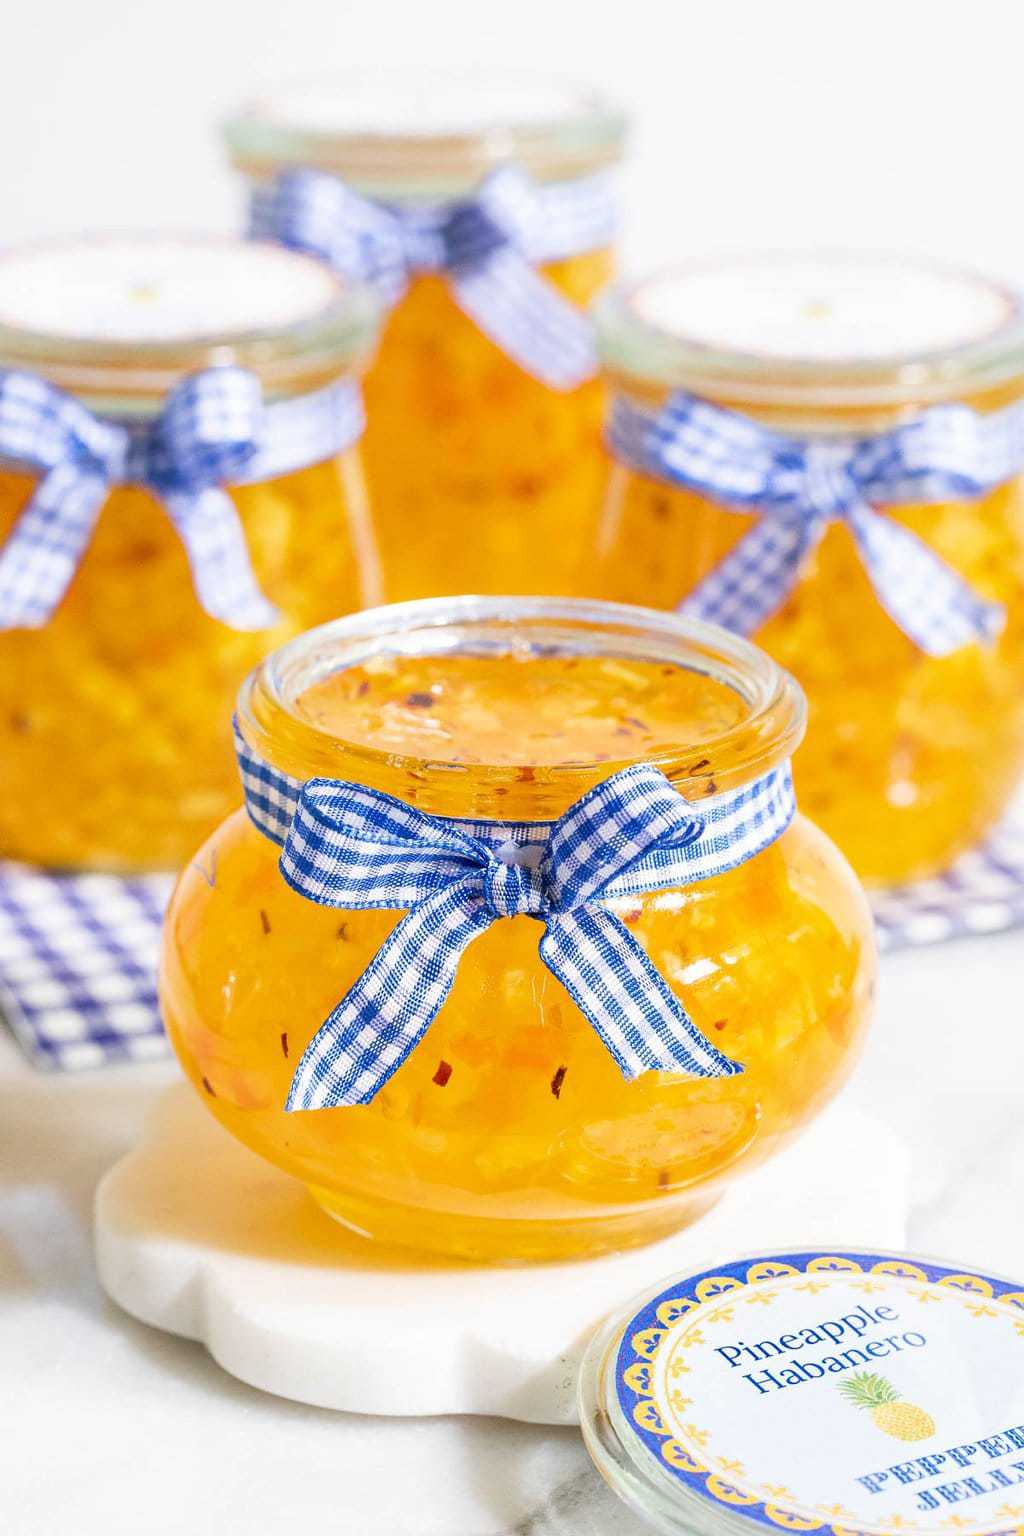 Vertical photo of Weck glass jars filled with Pineapple Habanero Pepper Jelly and decorated with blue and white checked ribbons and custom lid labels.